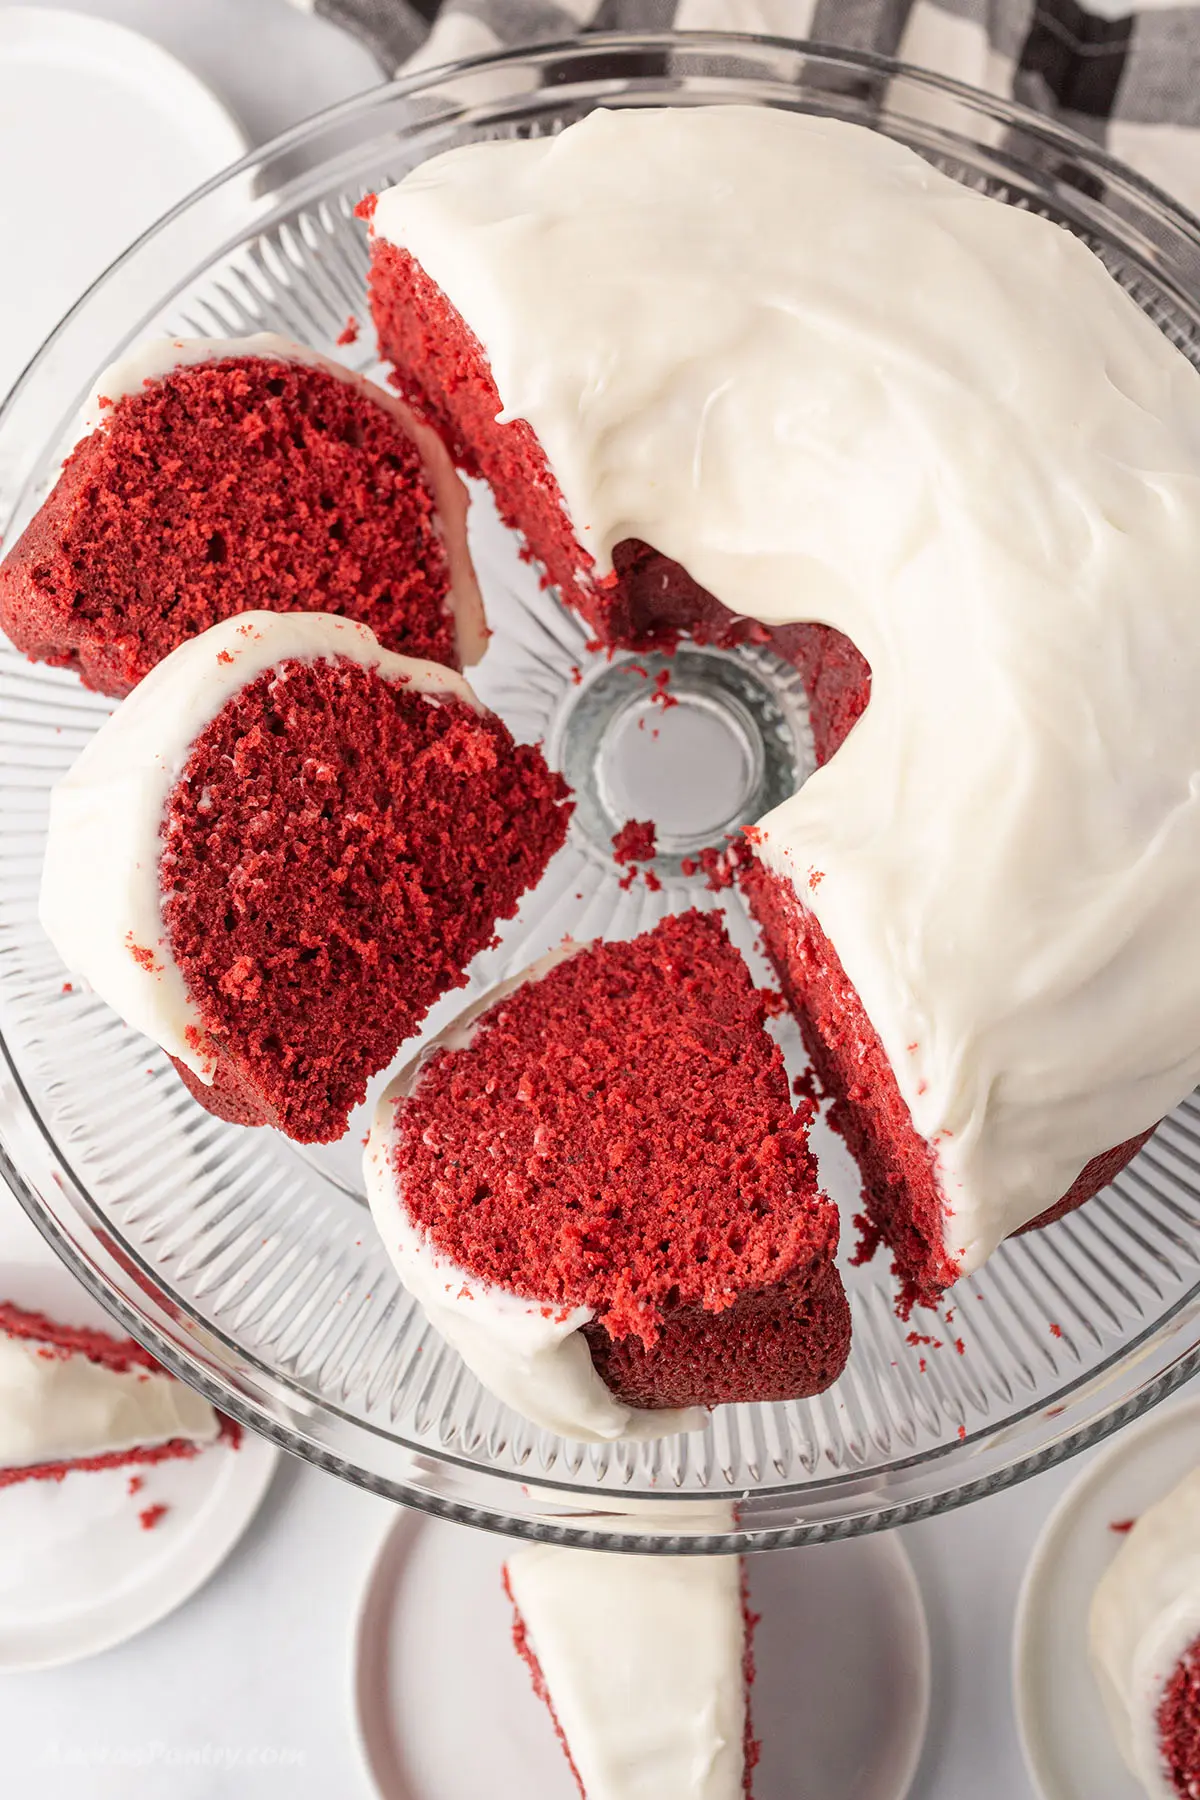 A top view of red velvet bundt with pieces cut to show texture.